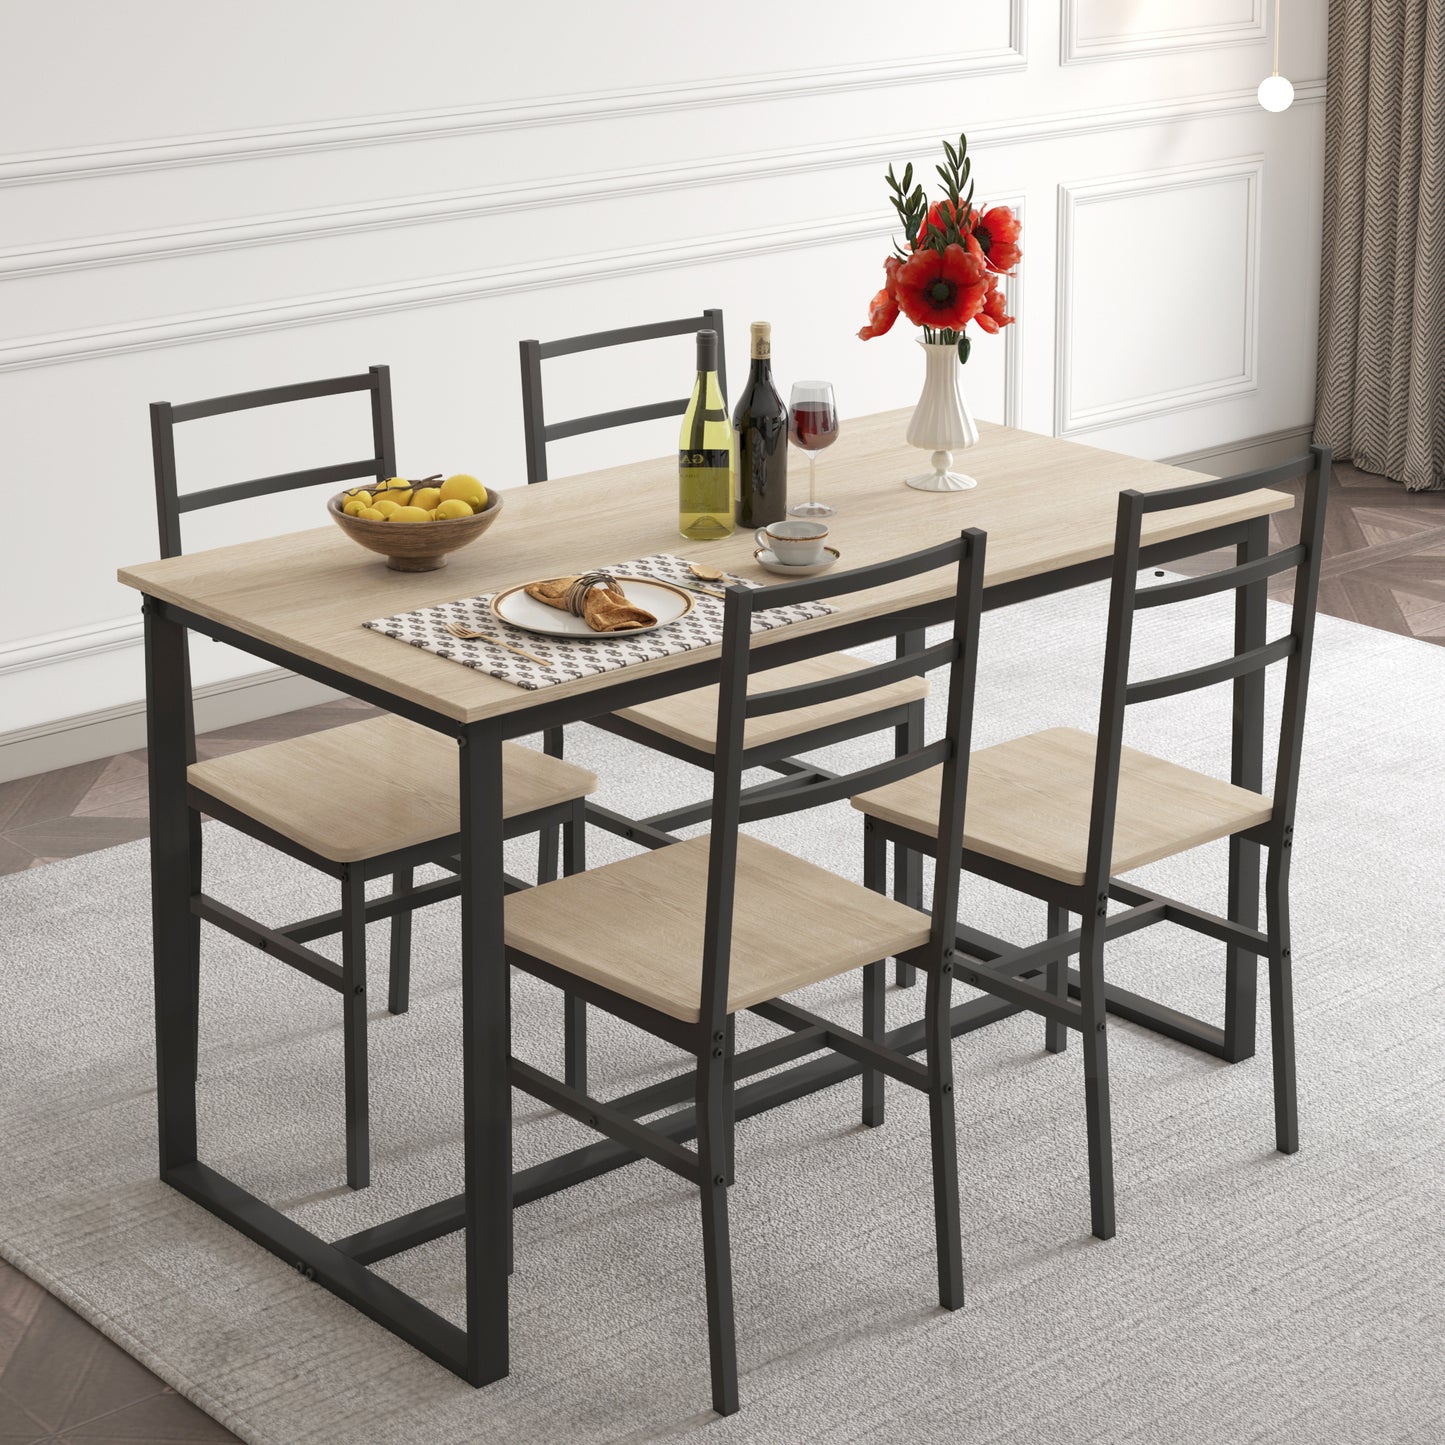 SYNGAR 5 Piece Dining Table Set for 4, Dining Room Table Set, Modern Rustic Table Set with 4 Chairs, Wooden Tabletop and Metal Frame, Home Kitchen Breakfast Table and Chairs Set, D6116